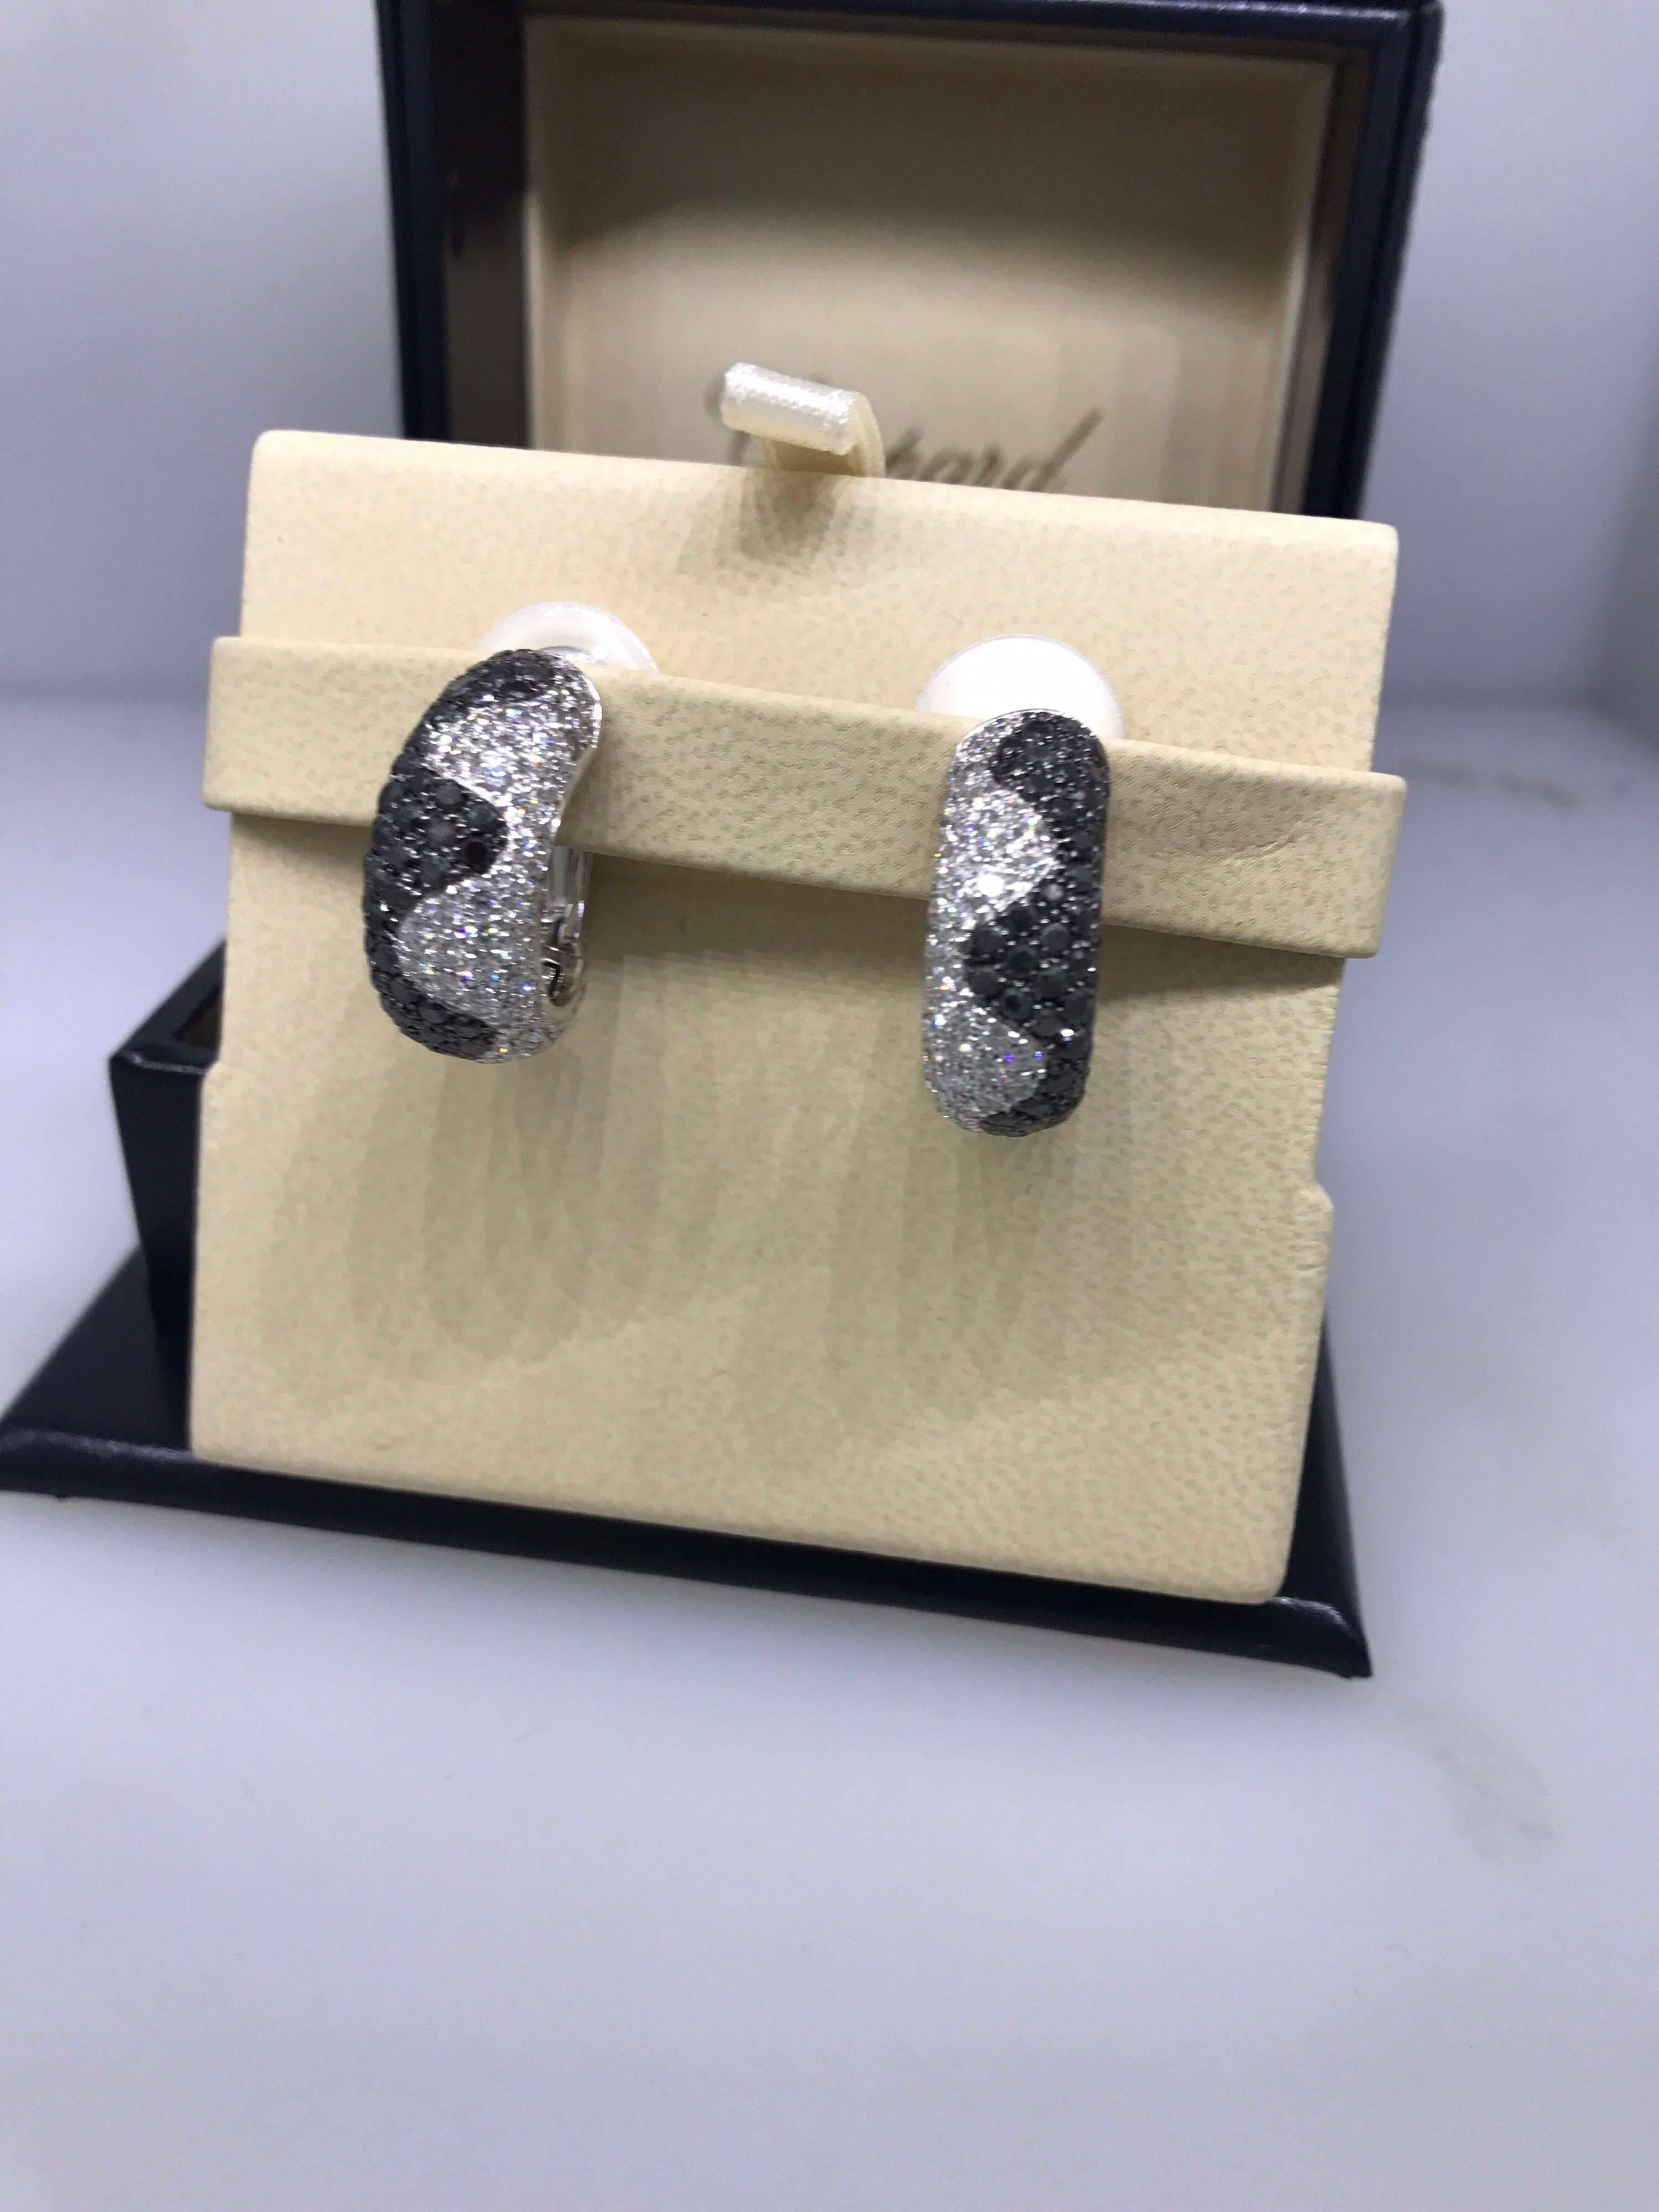 Chopard Women's 18 Karat White Gold Black and White Diamond Earrings 84/4102 In New Condition For Sale In New York, NY